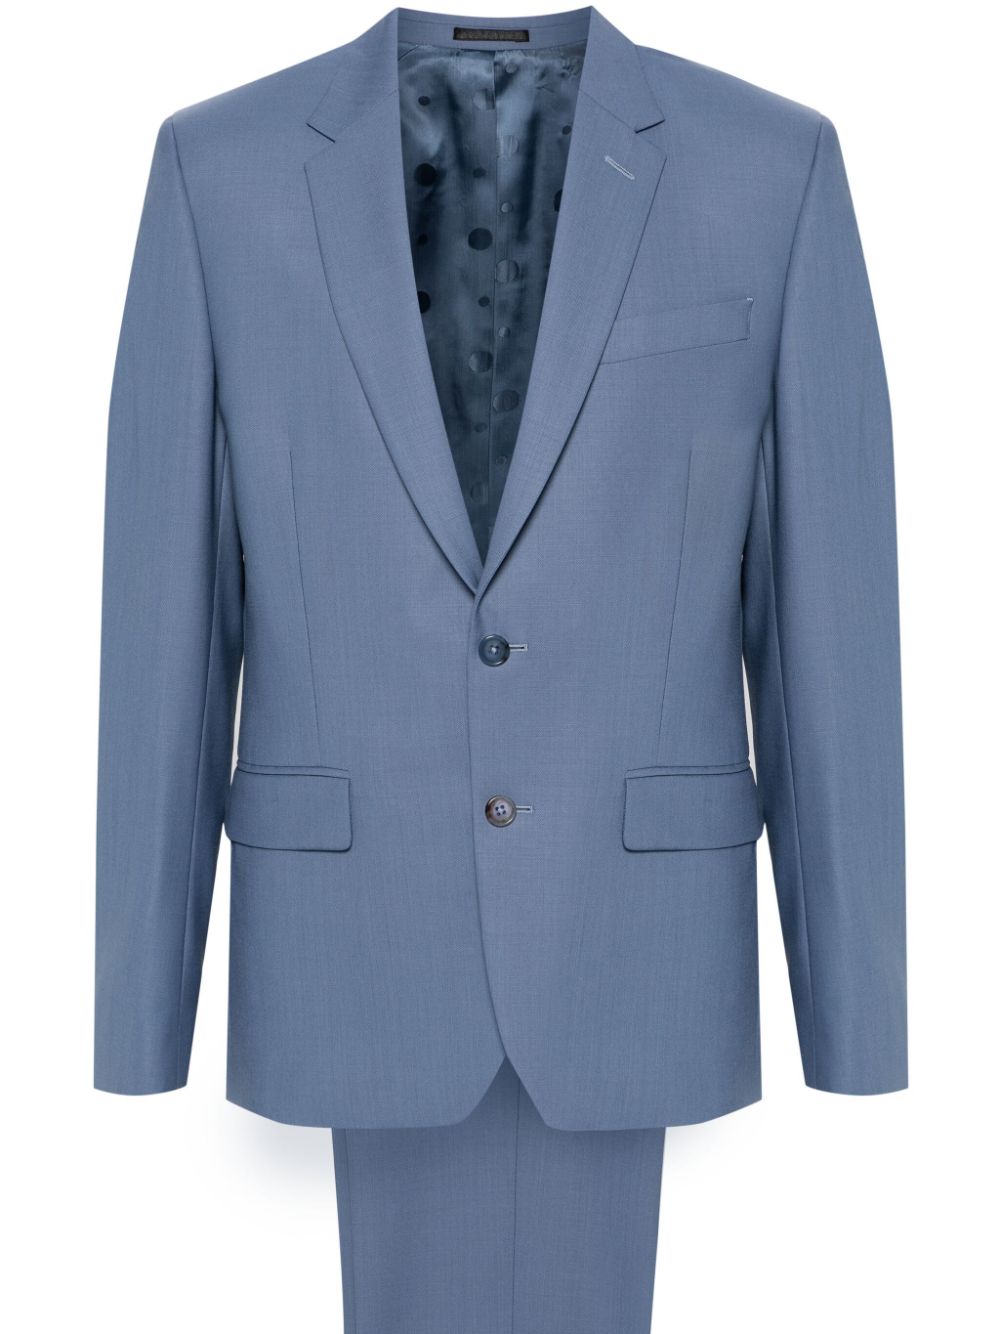 Paul Smith single-breasted suit - Blue von Paul Smith